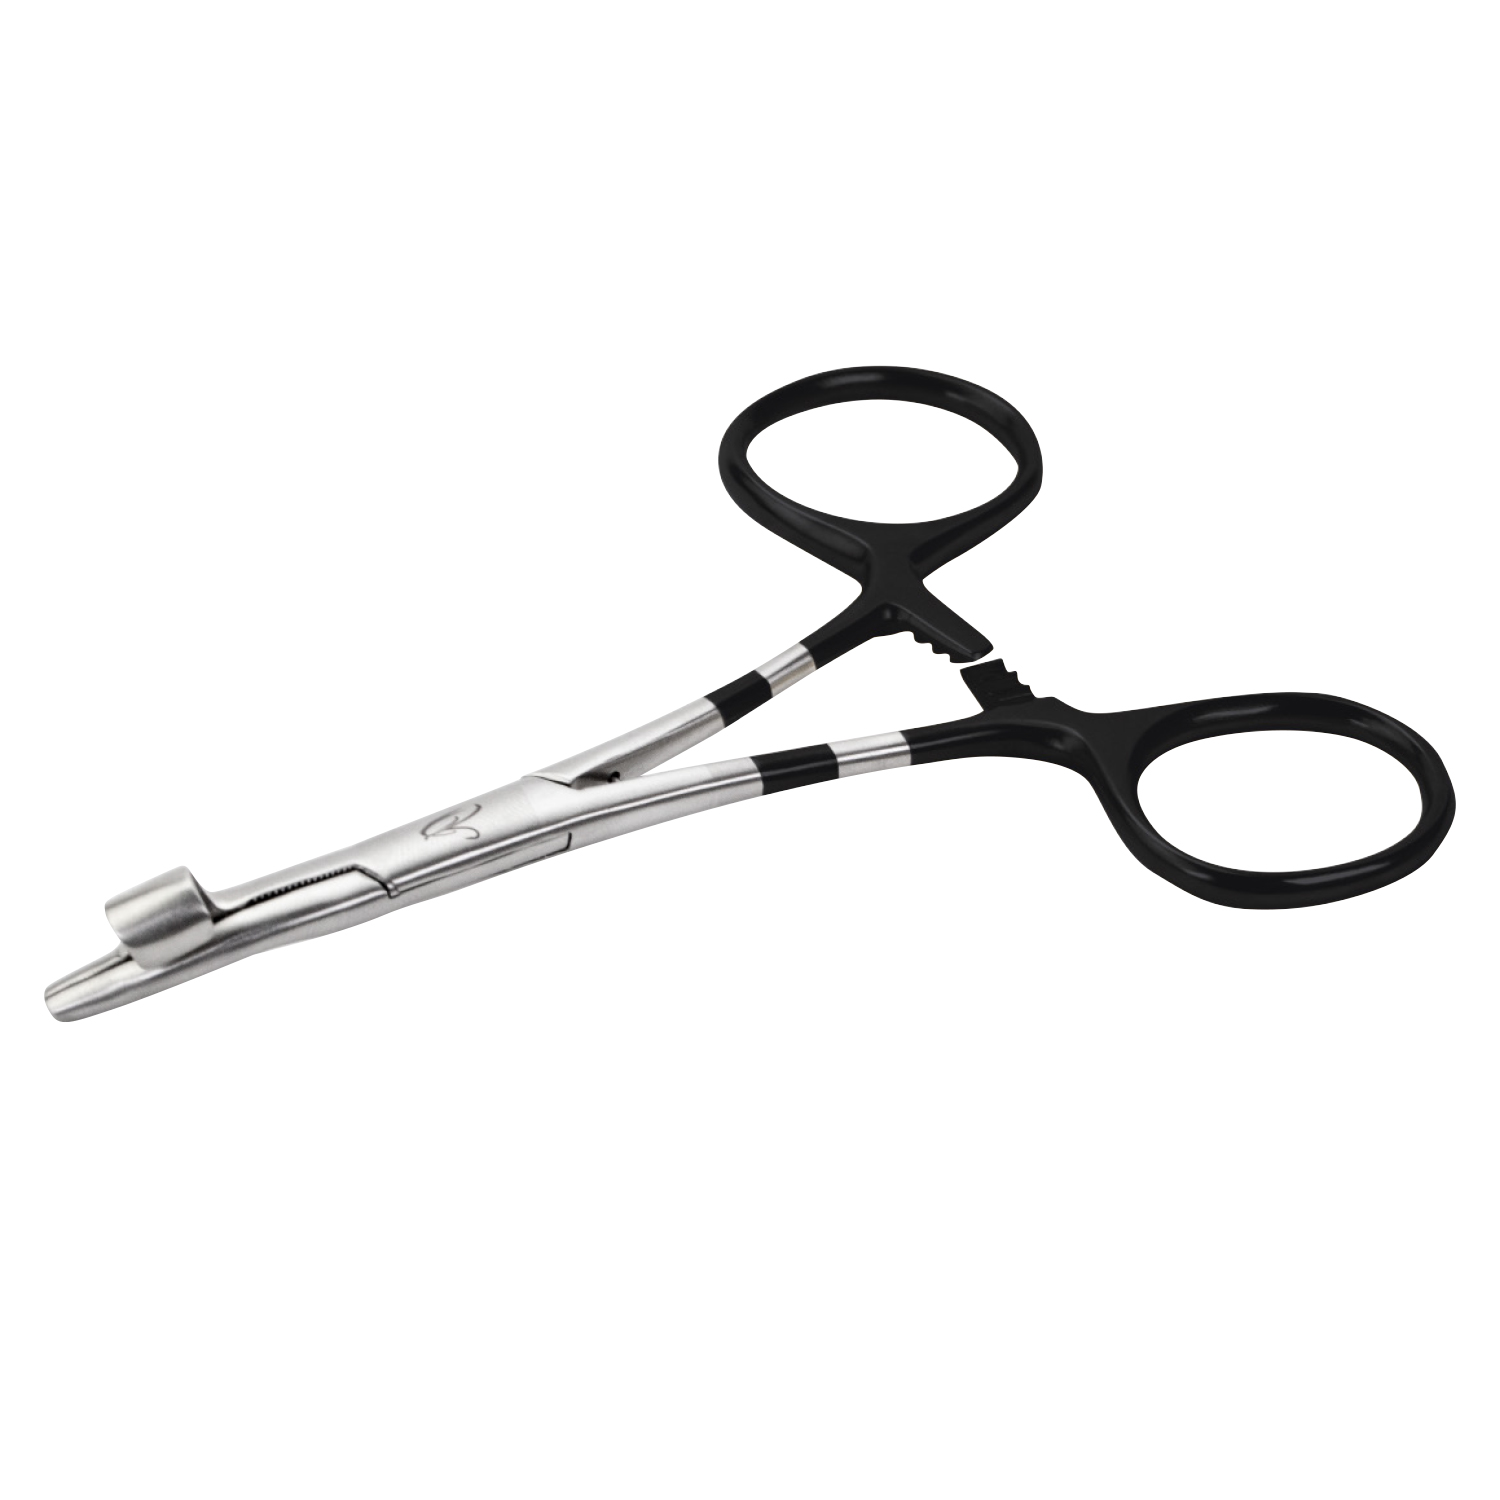 2 Pc Fly Fishing Pliers Hook Removing & Gripping Locking Forceps